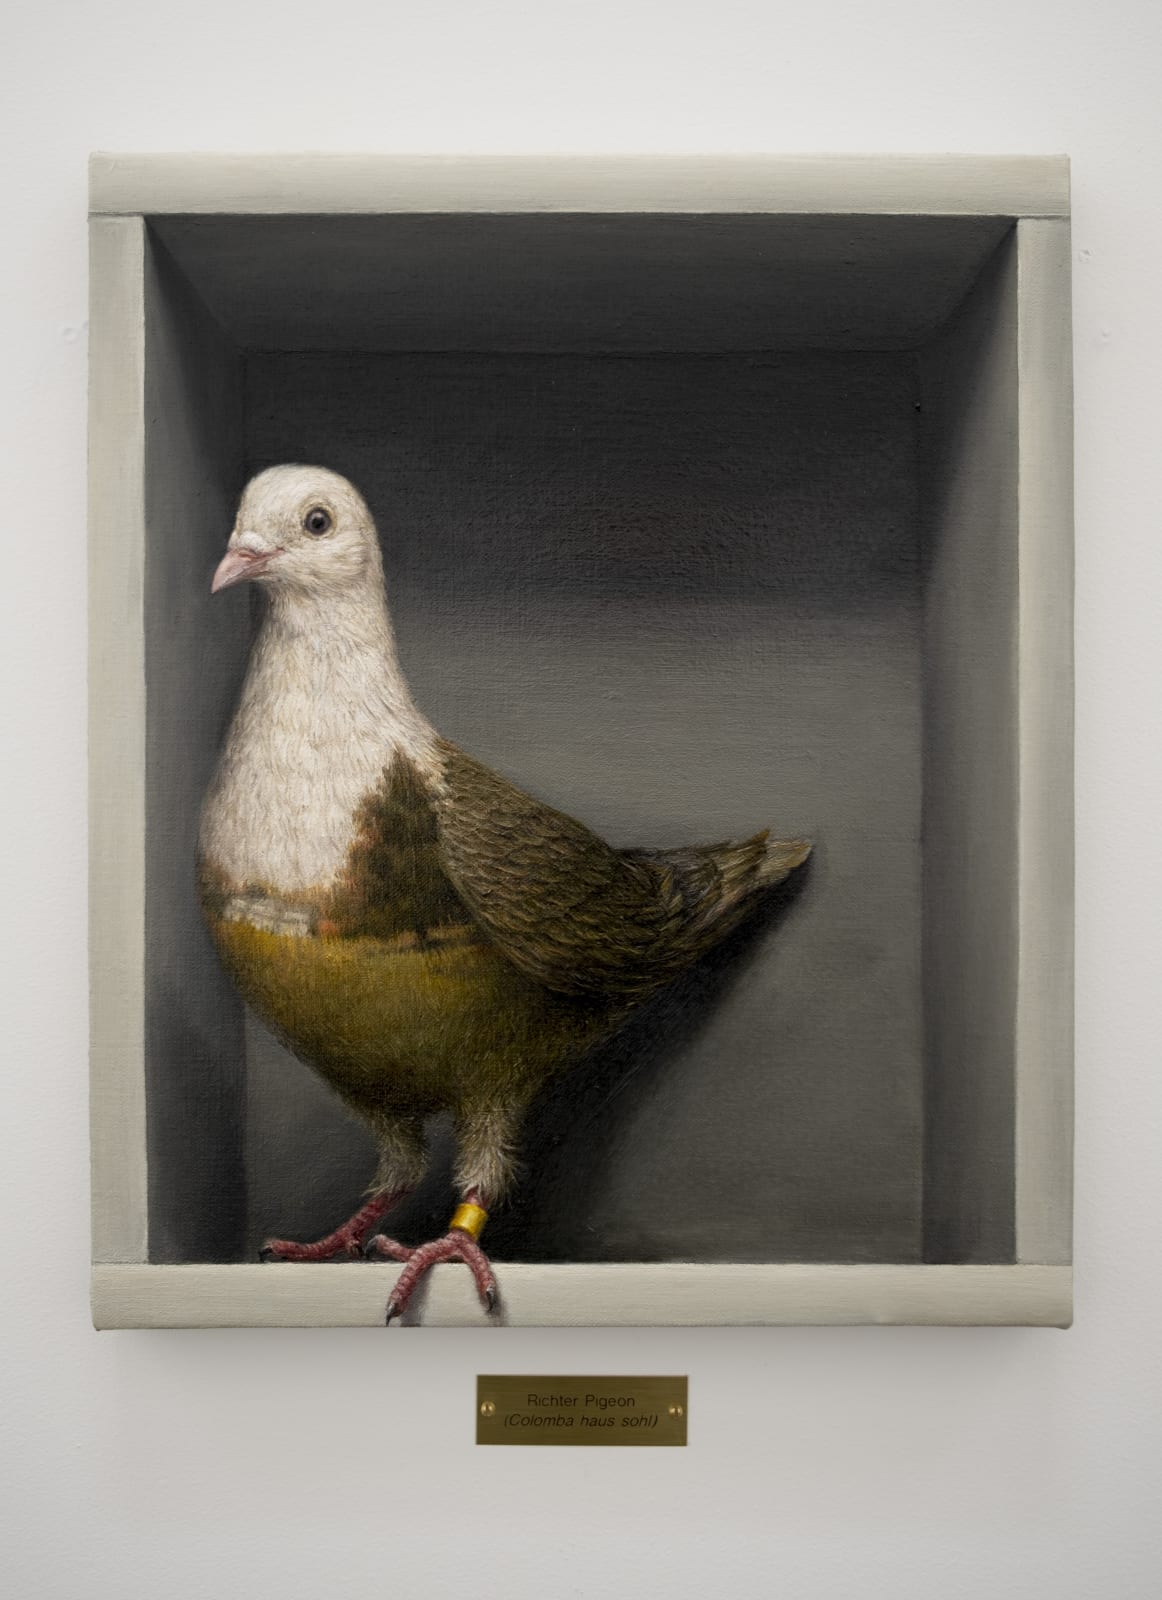 Clive Smith, Richter Pigeon (Colomba haus sohl), 2022